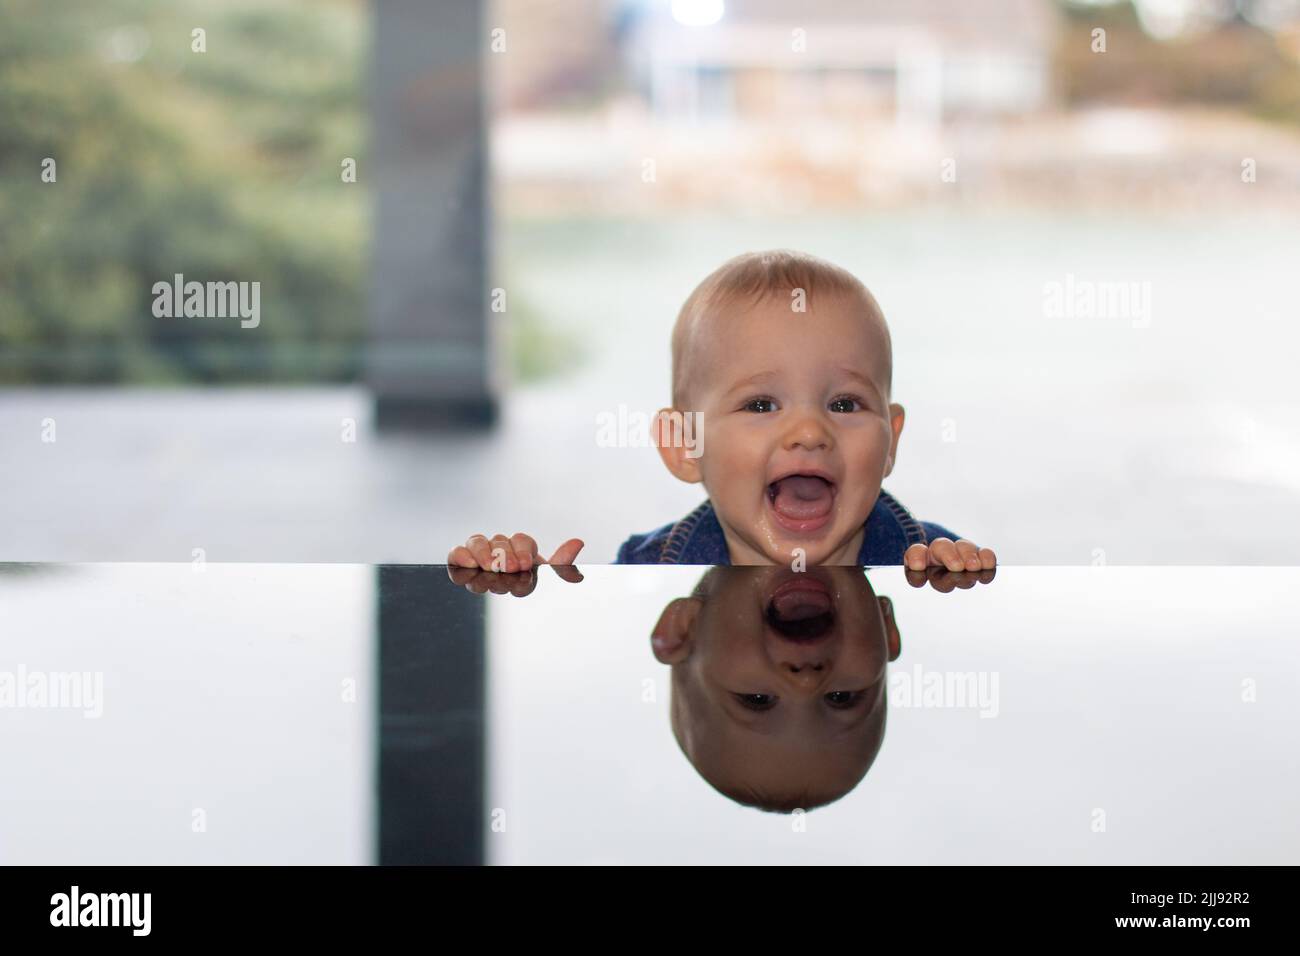 Laughing cute naughty child portrait with head above the glass table with reflection, toddler positive home life scene concept Stock Photo